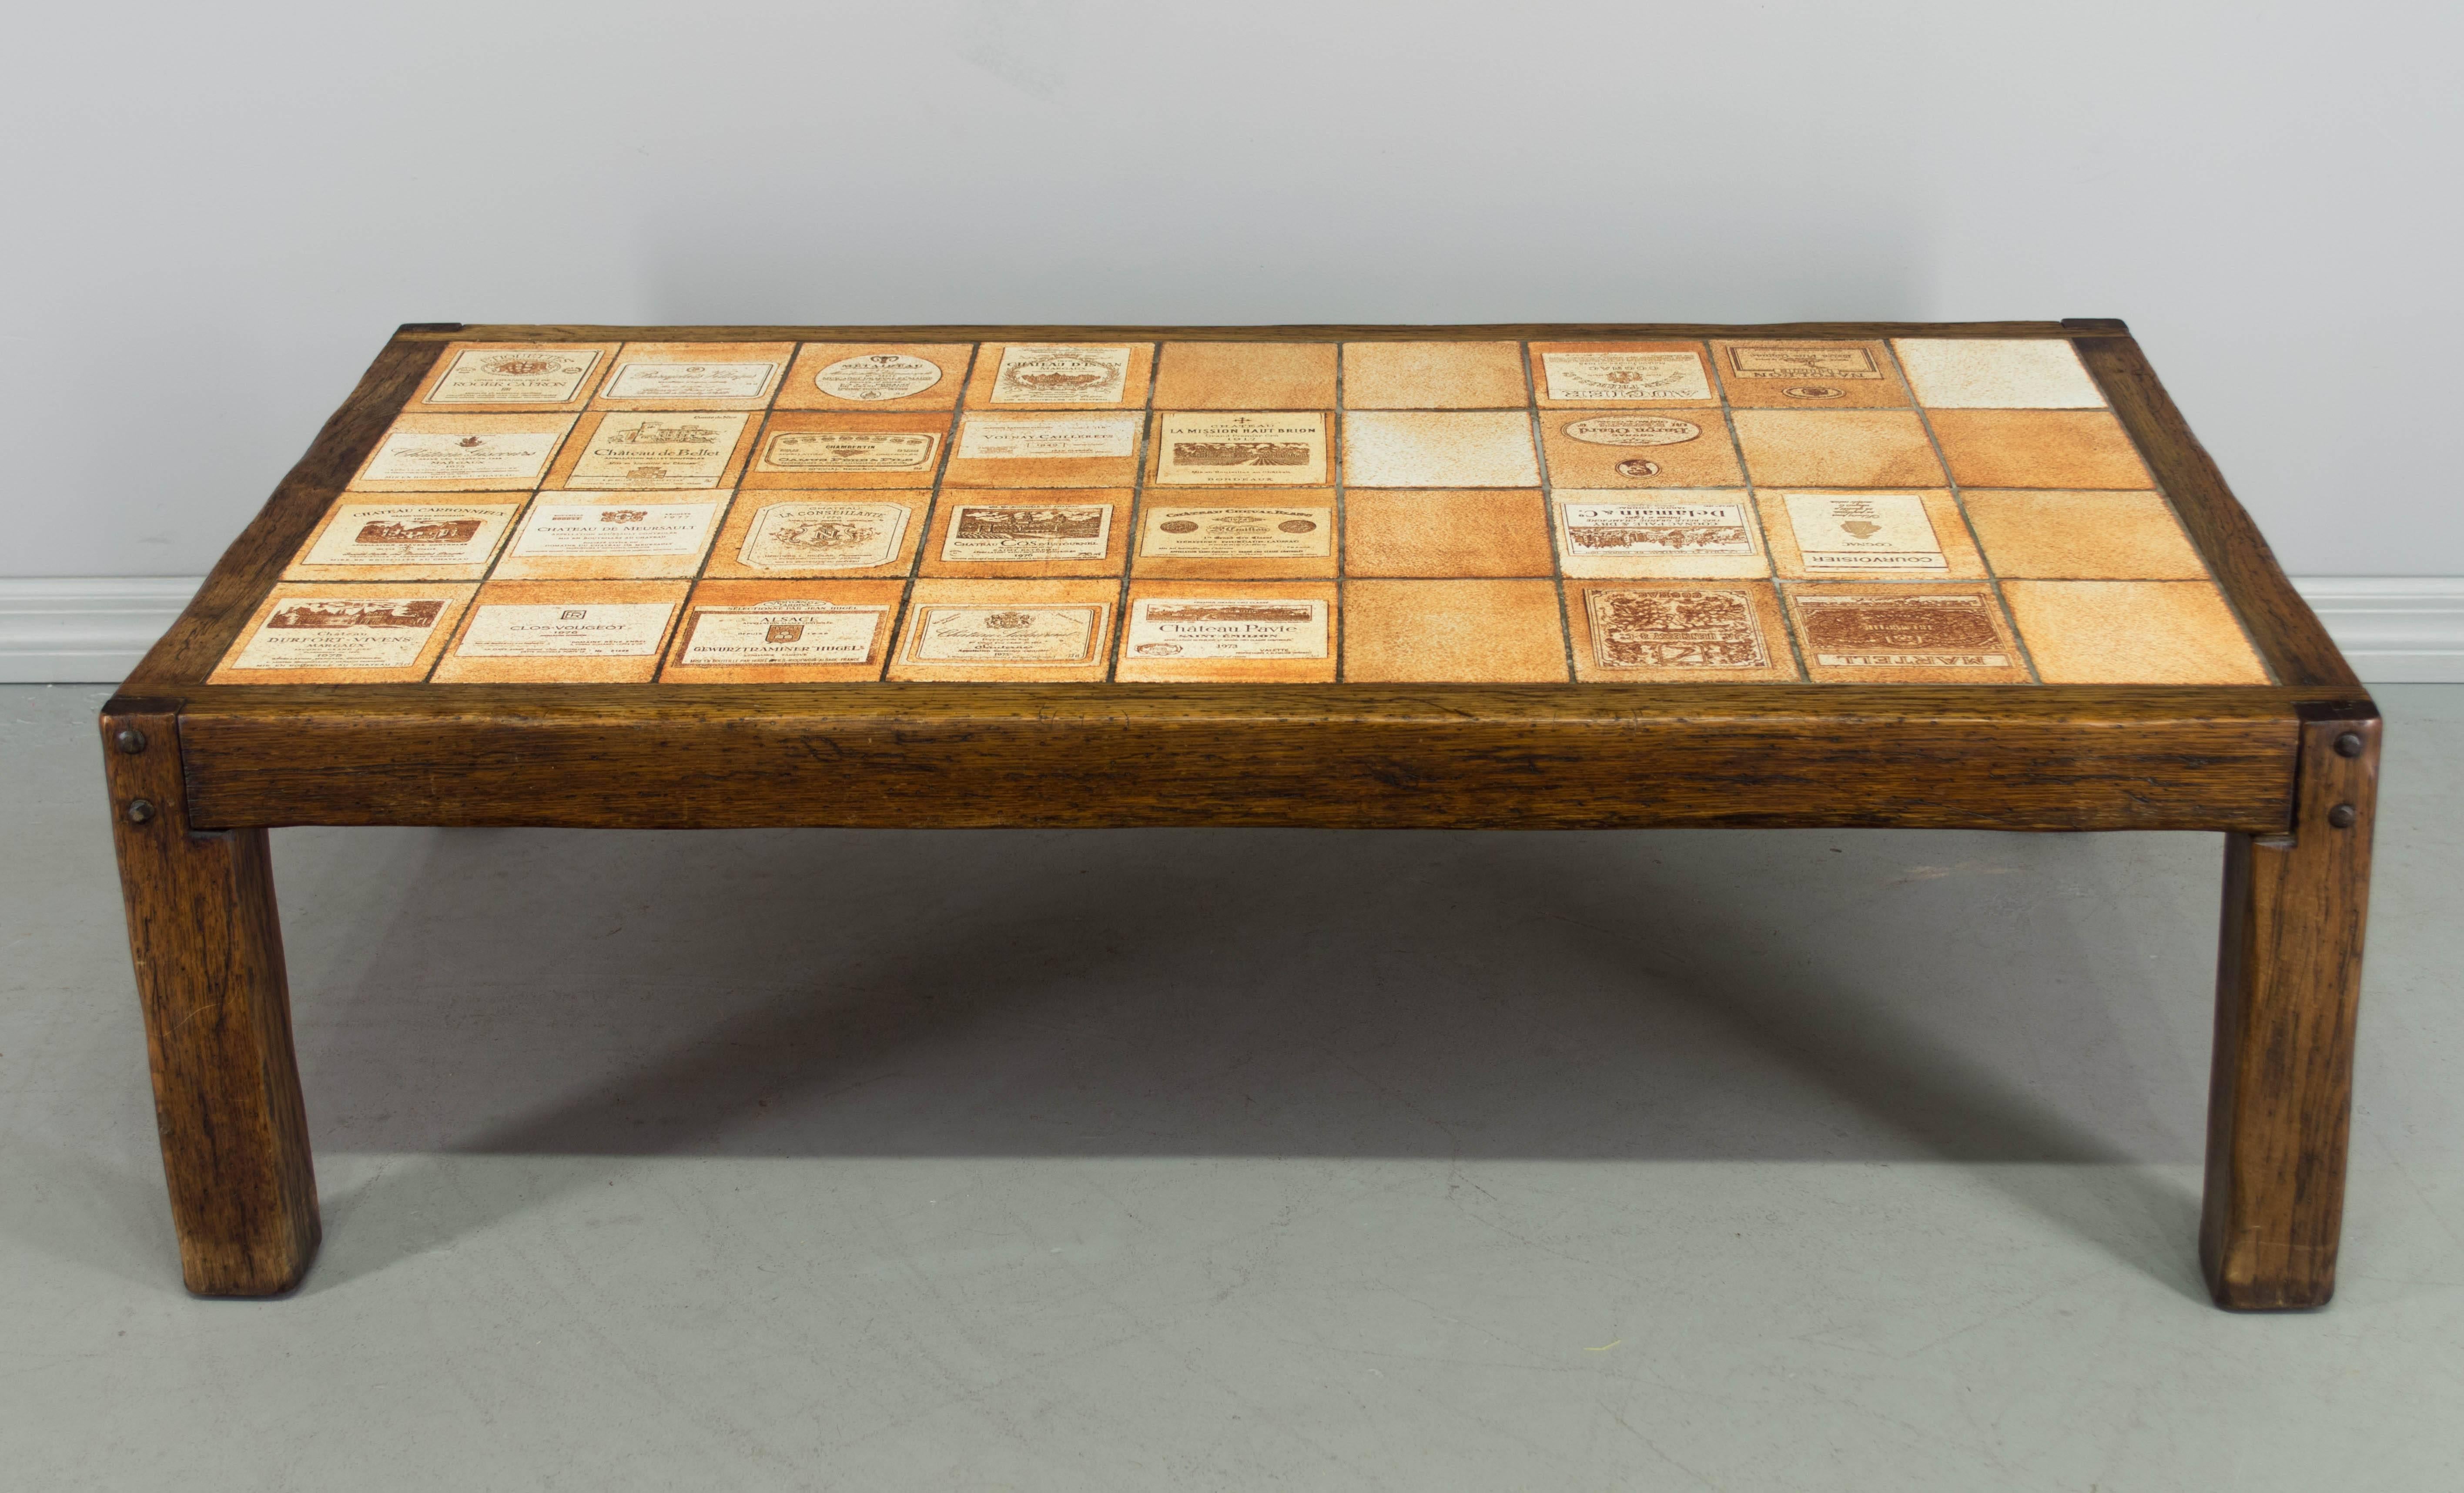 Coffee table by ceramicist Roger Capron with surface made of tiles depicting labels of notable Fine French wines. Base is made of solid oak with pegged construction. All original. Clever signature tile in upper left corner makes note of his 1954